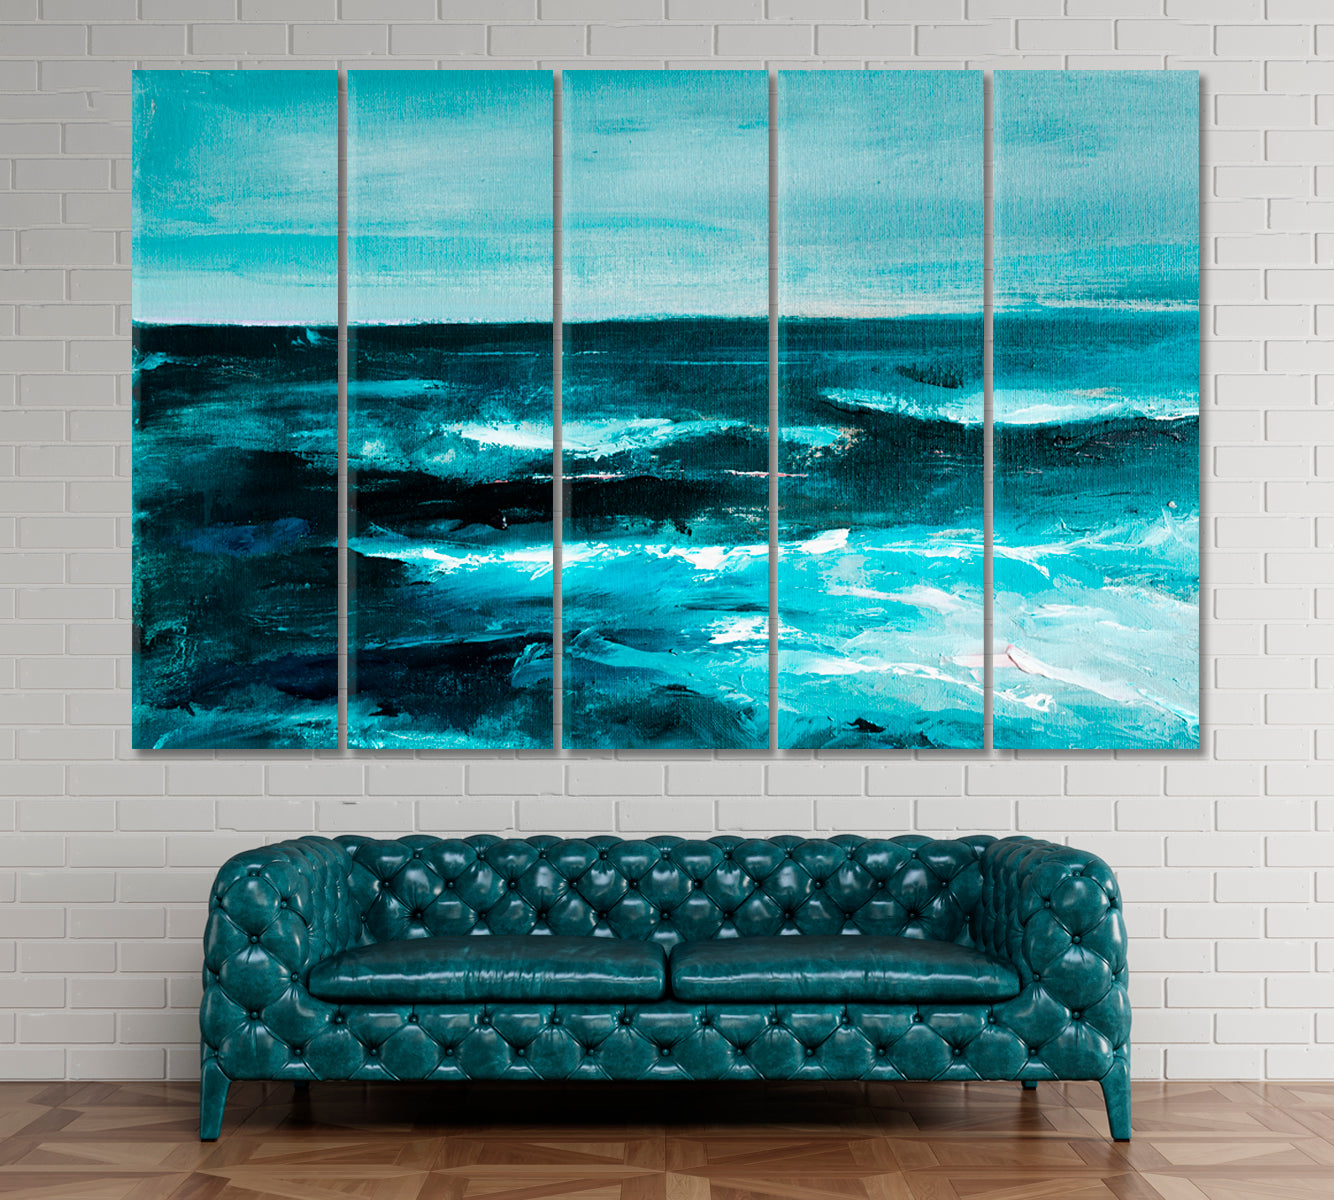 Contemporary Abstract Ocean Painting Canvas Print ArtLexy 5 Panels 36"x24" inches 